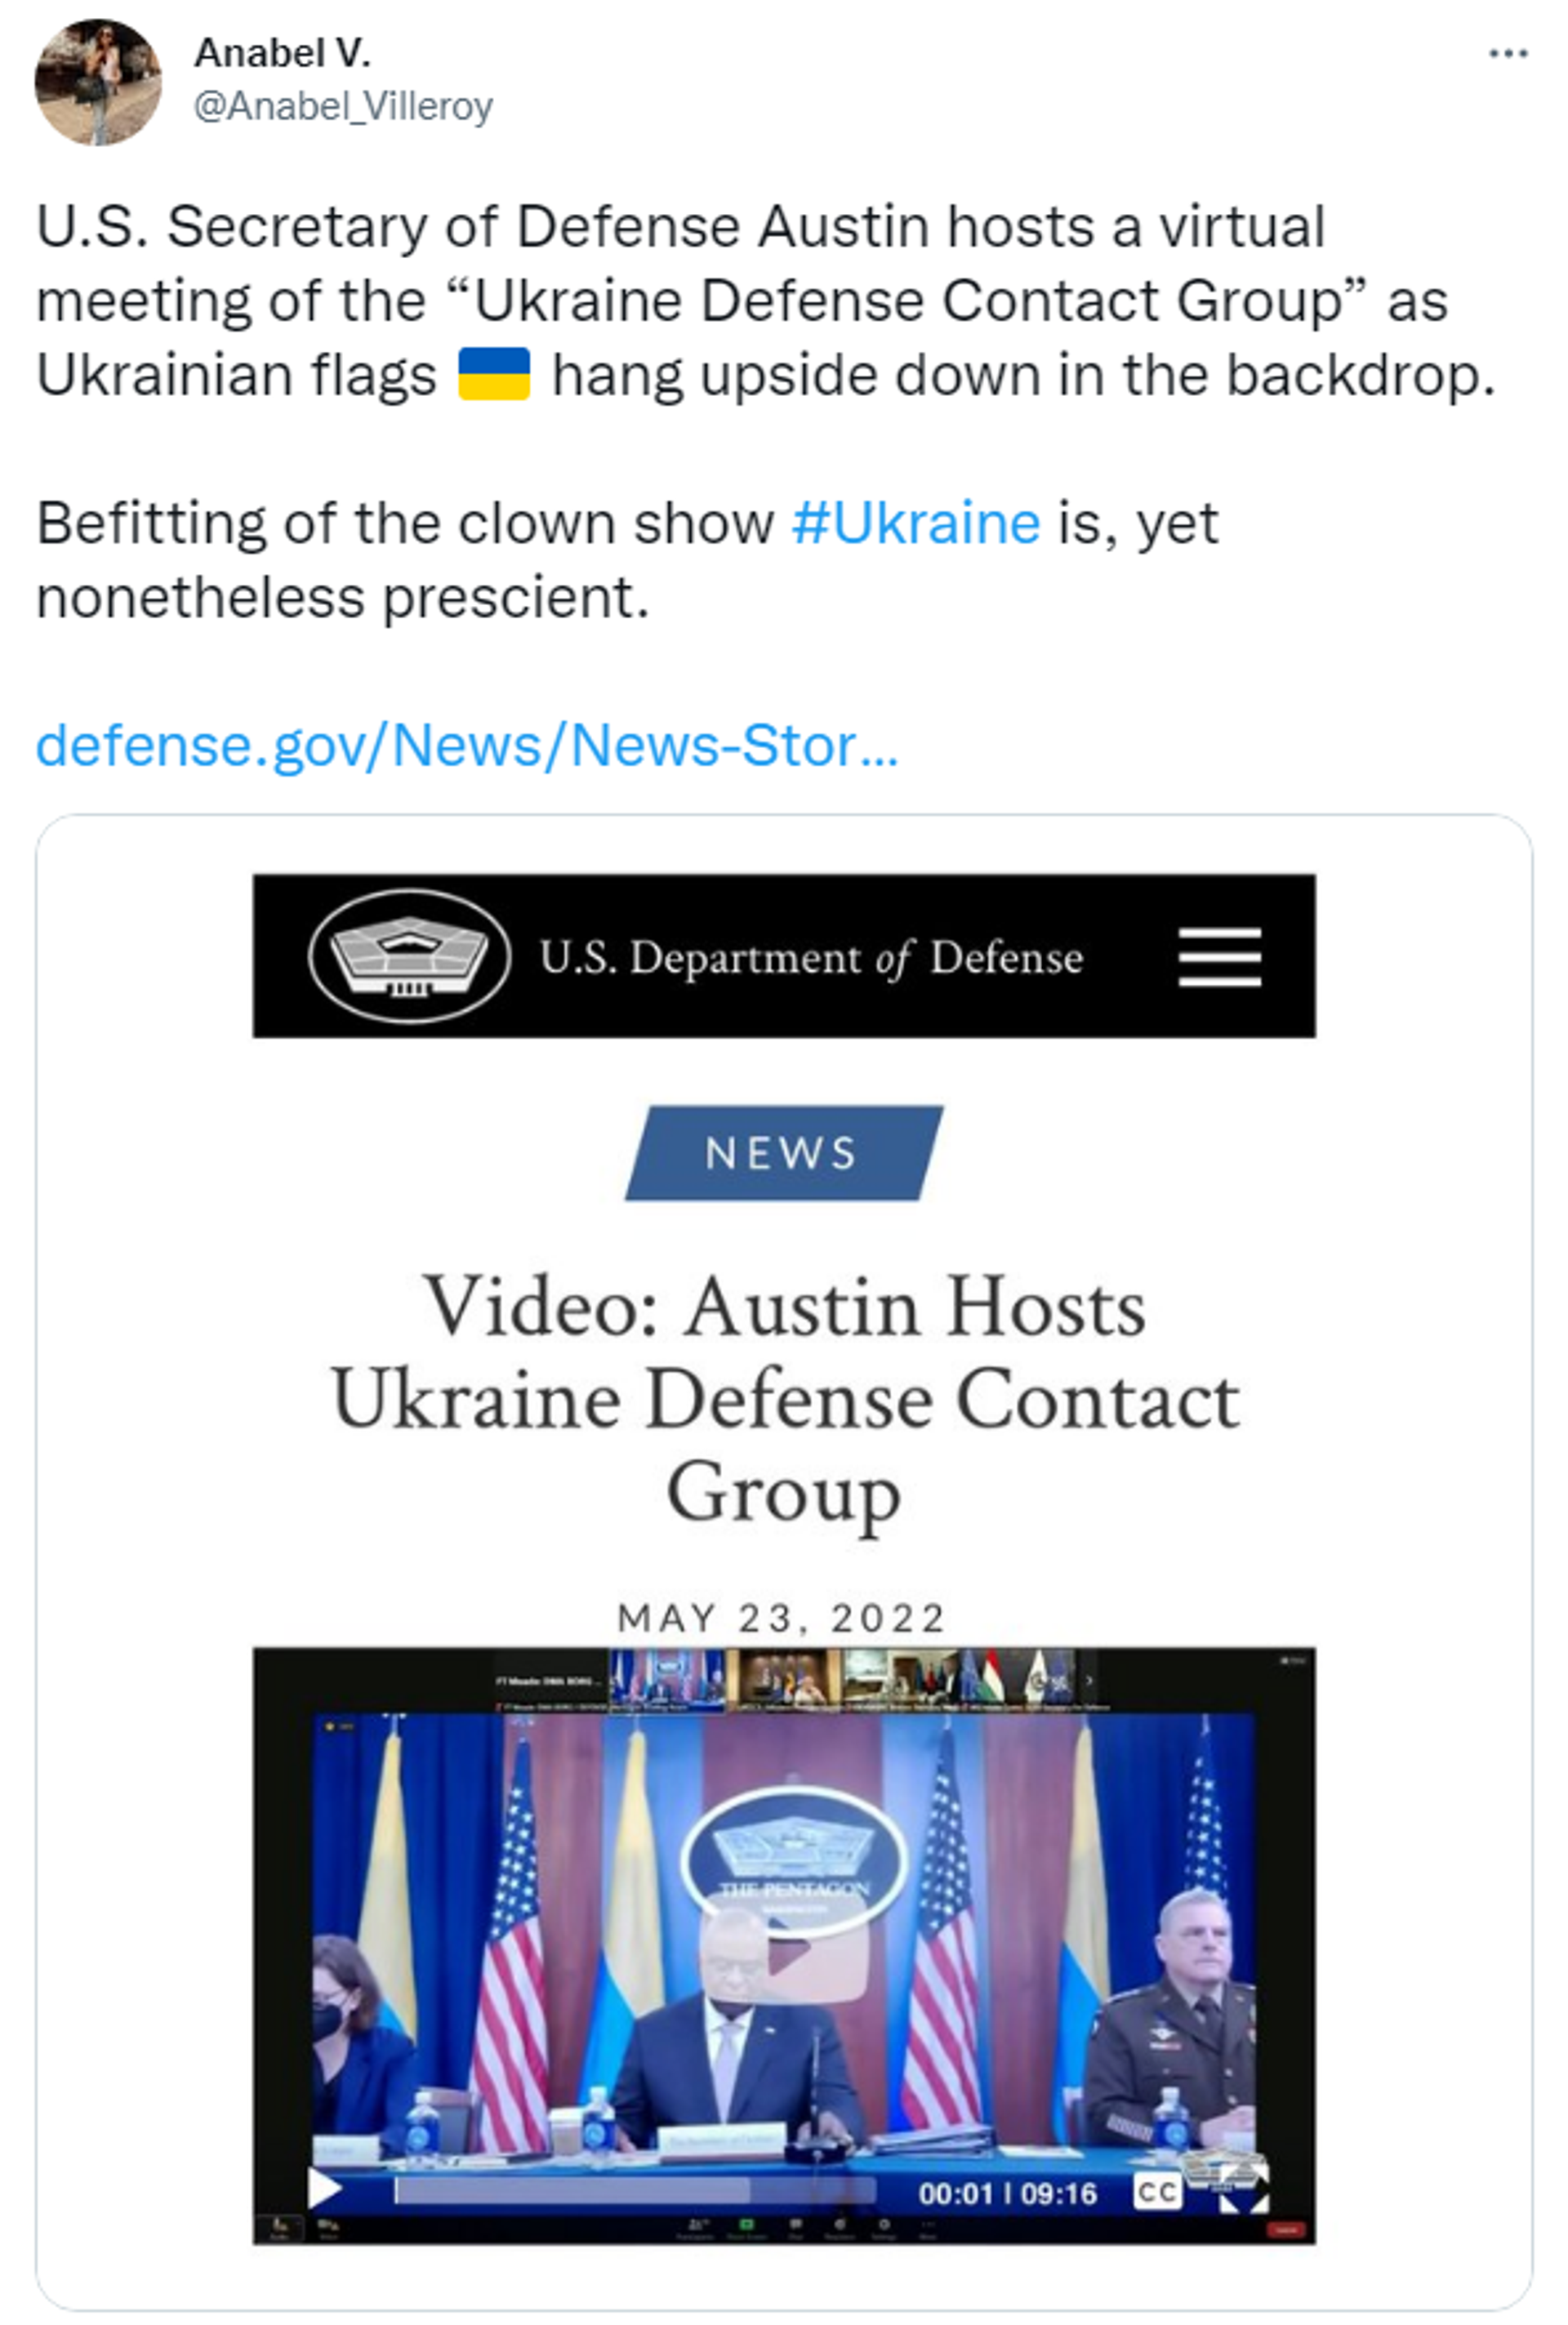 Tweet ridiculing upside-down Ukrainian flags at an international meeting of defence ministers to raise military aid for Ukraine - Sputnik International, 1920, 25.05.2022